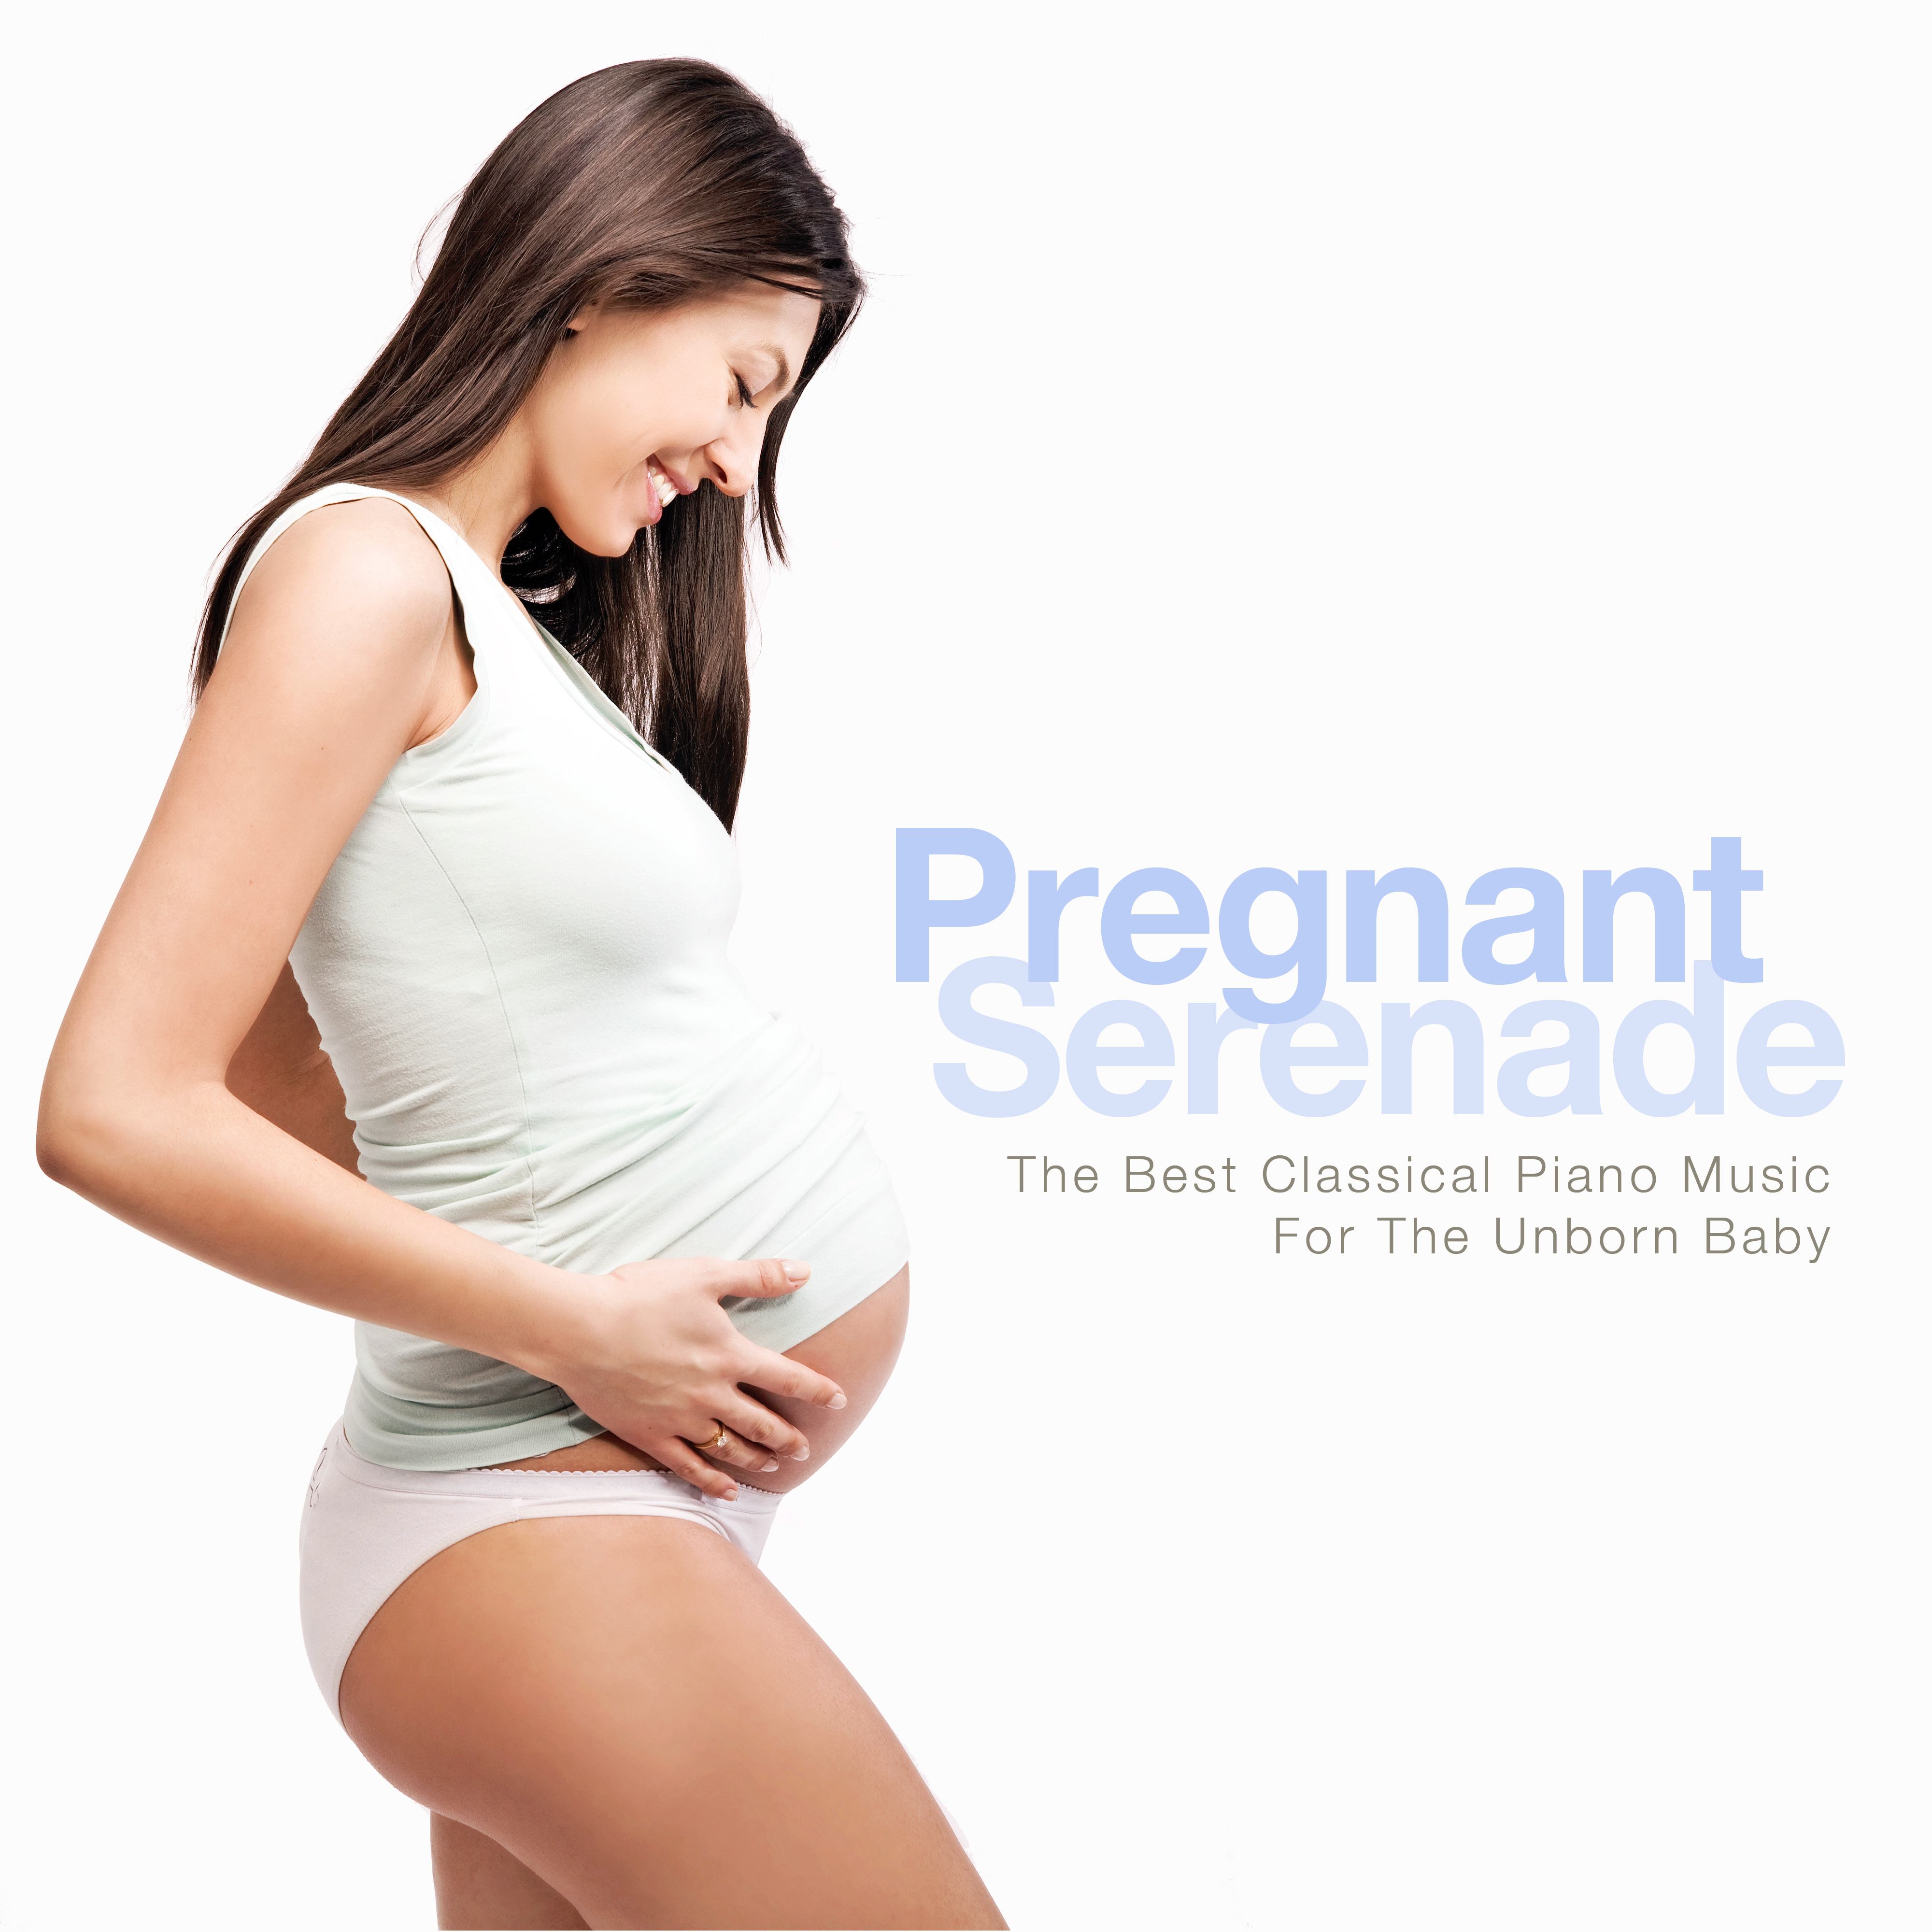 Pregnant Serenade: The Best Classical Piano Music for the Unborn Baby